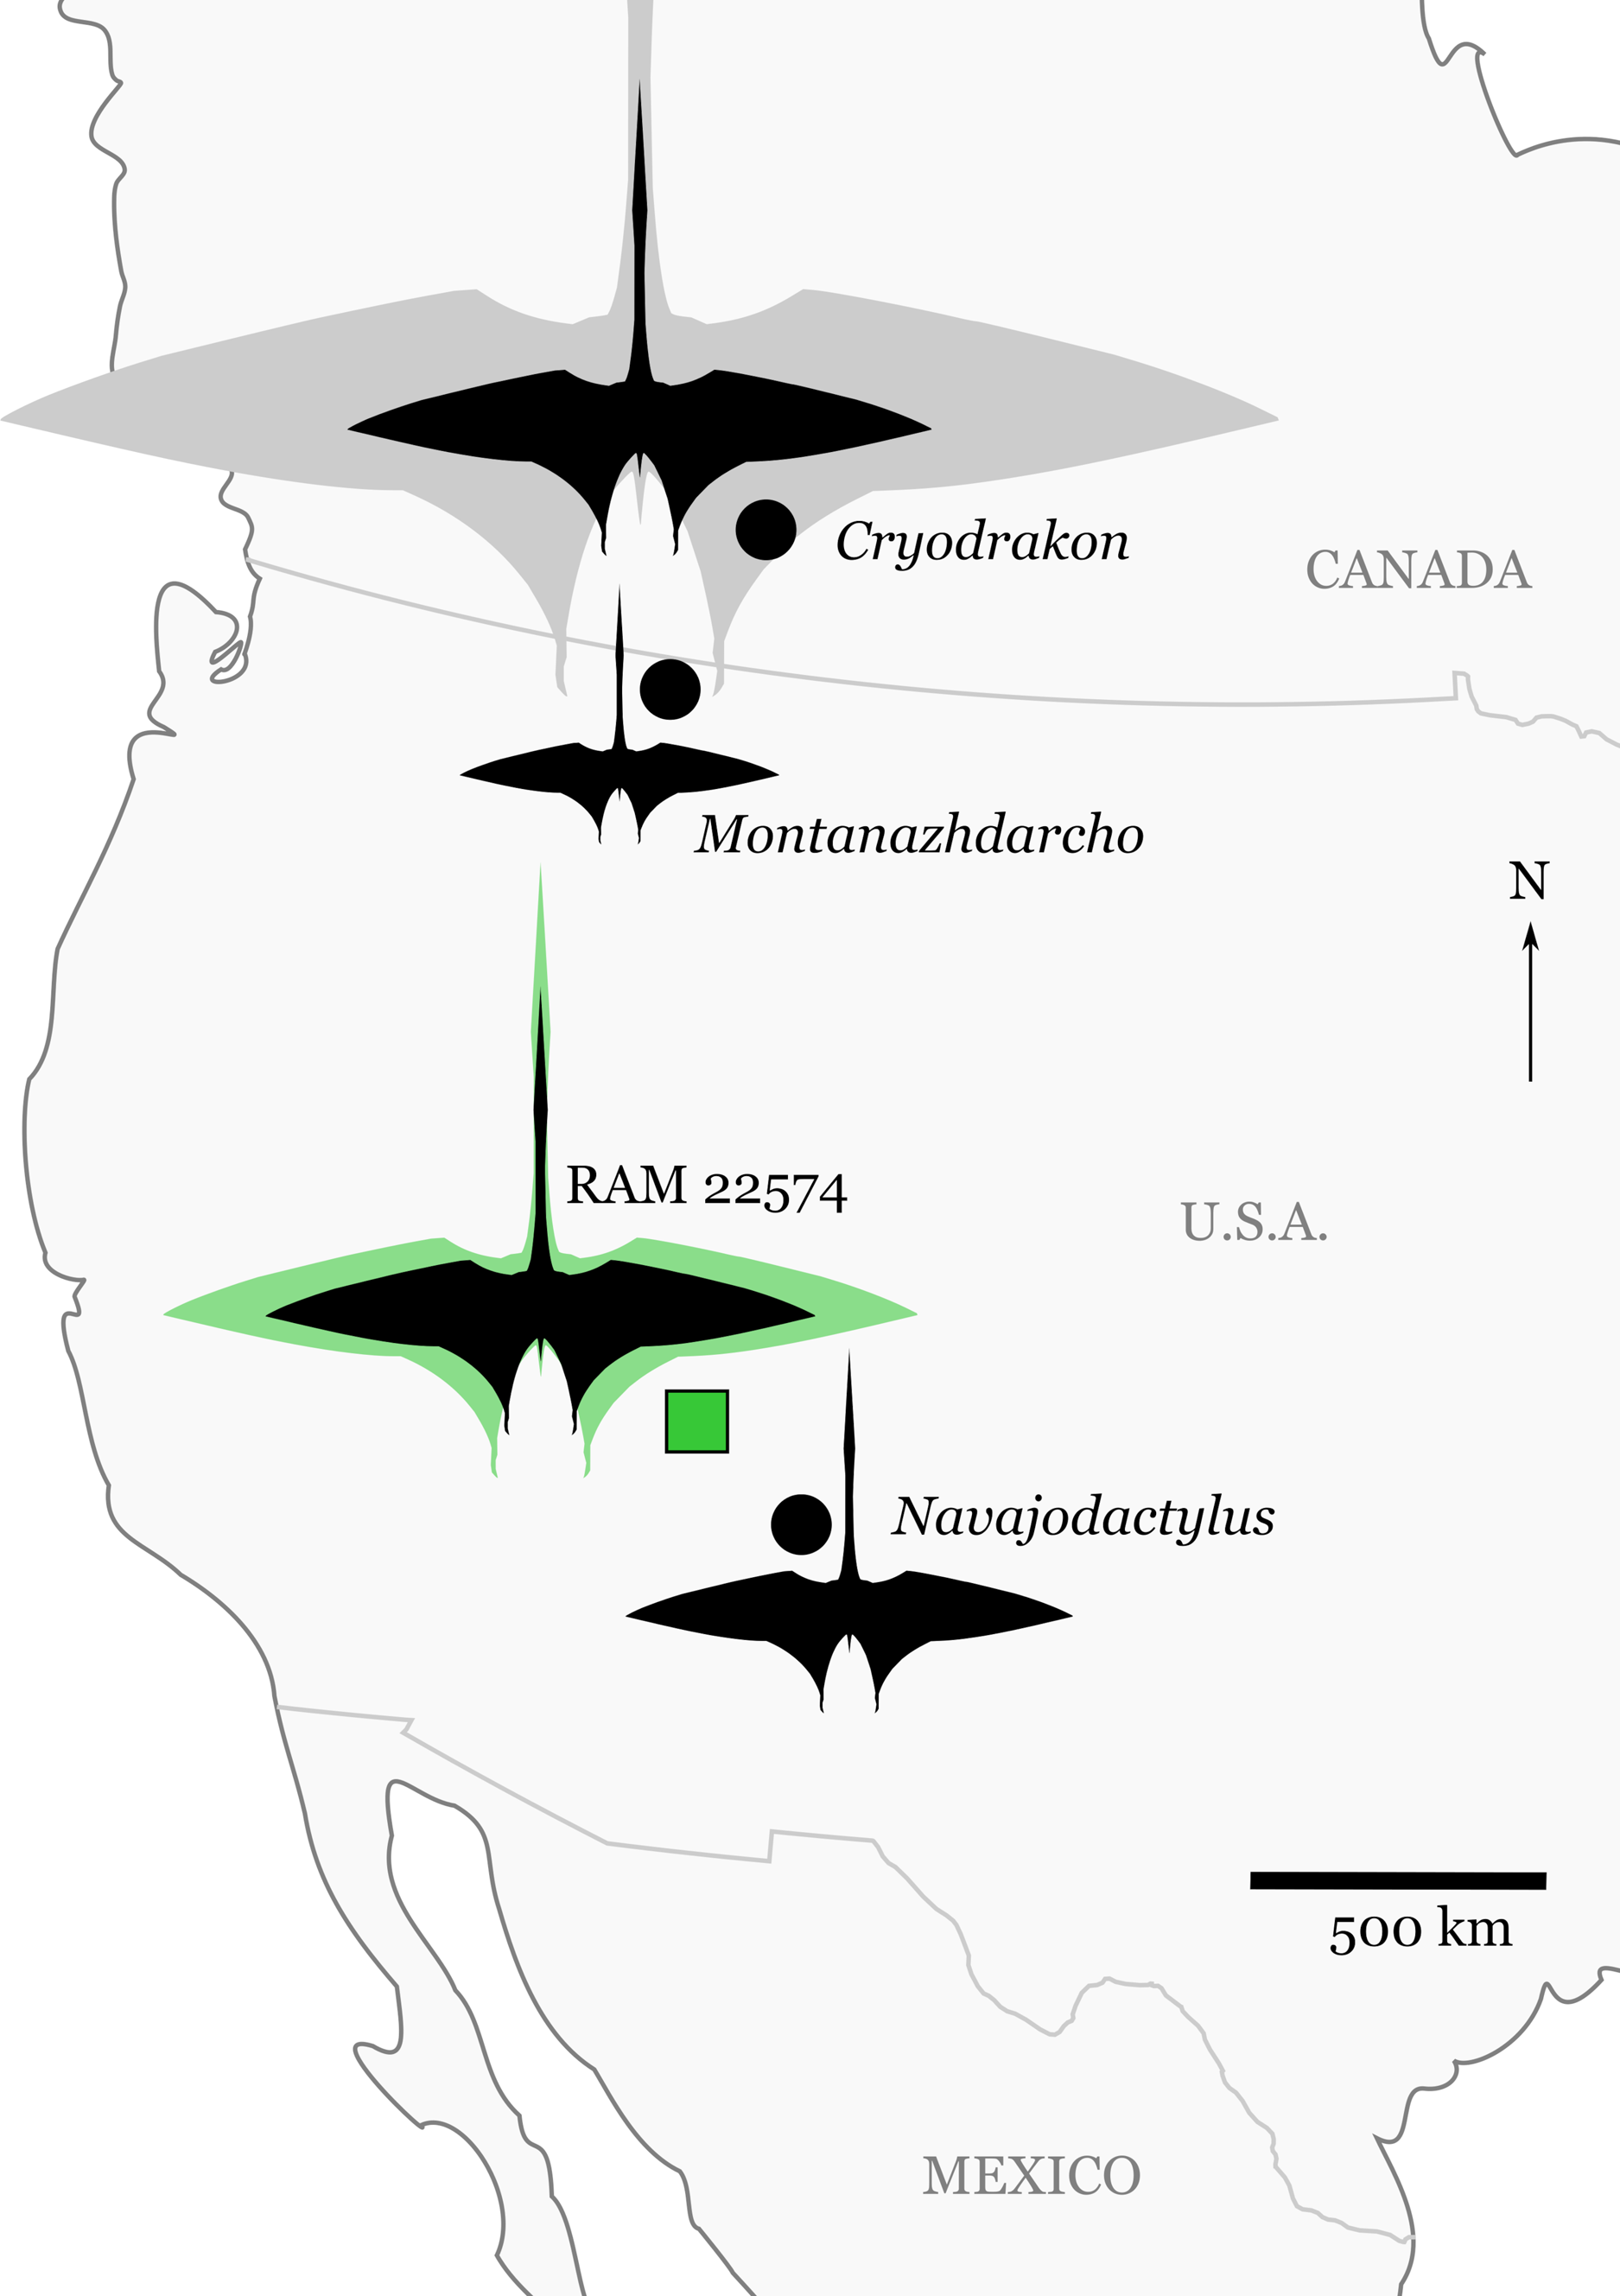 Record claims of pterosaur wingspans and equivalent standing heights